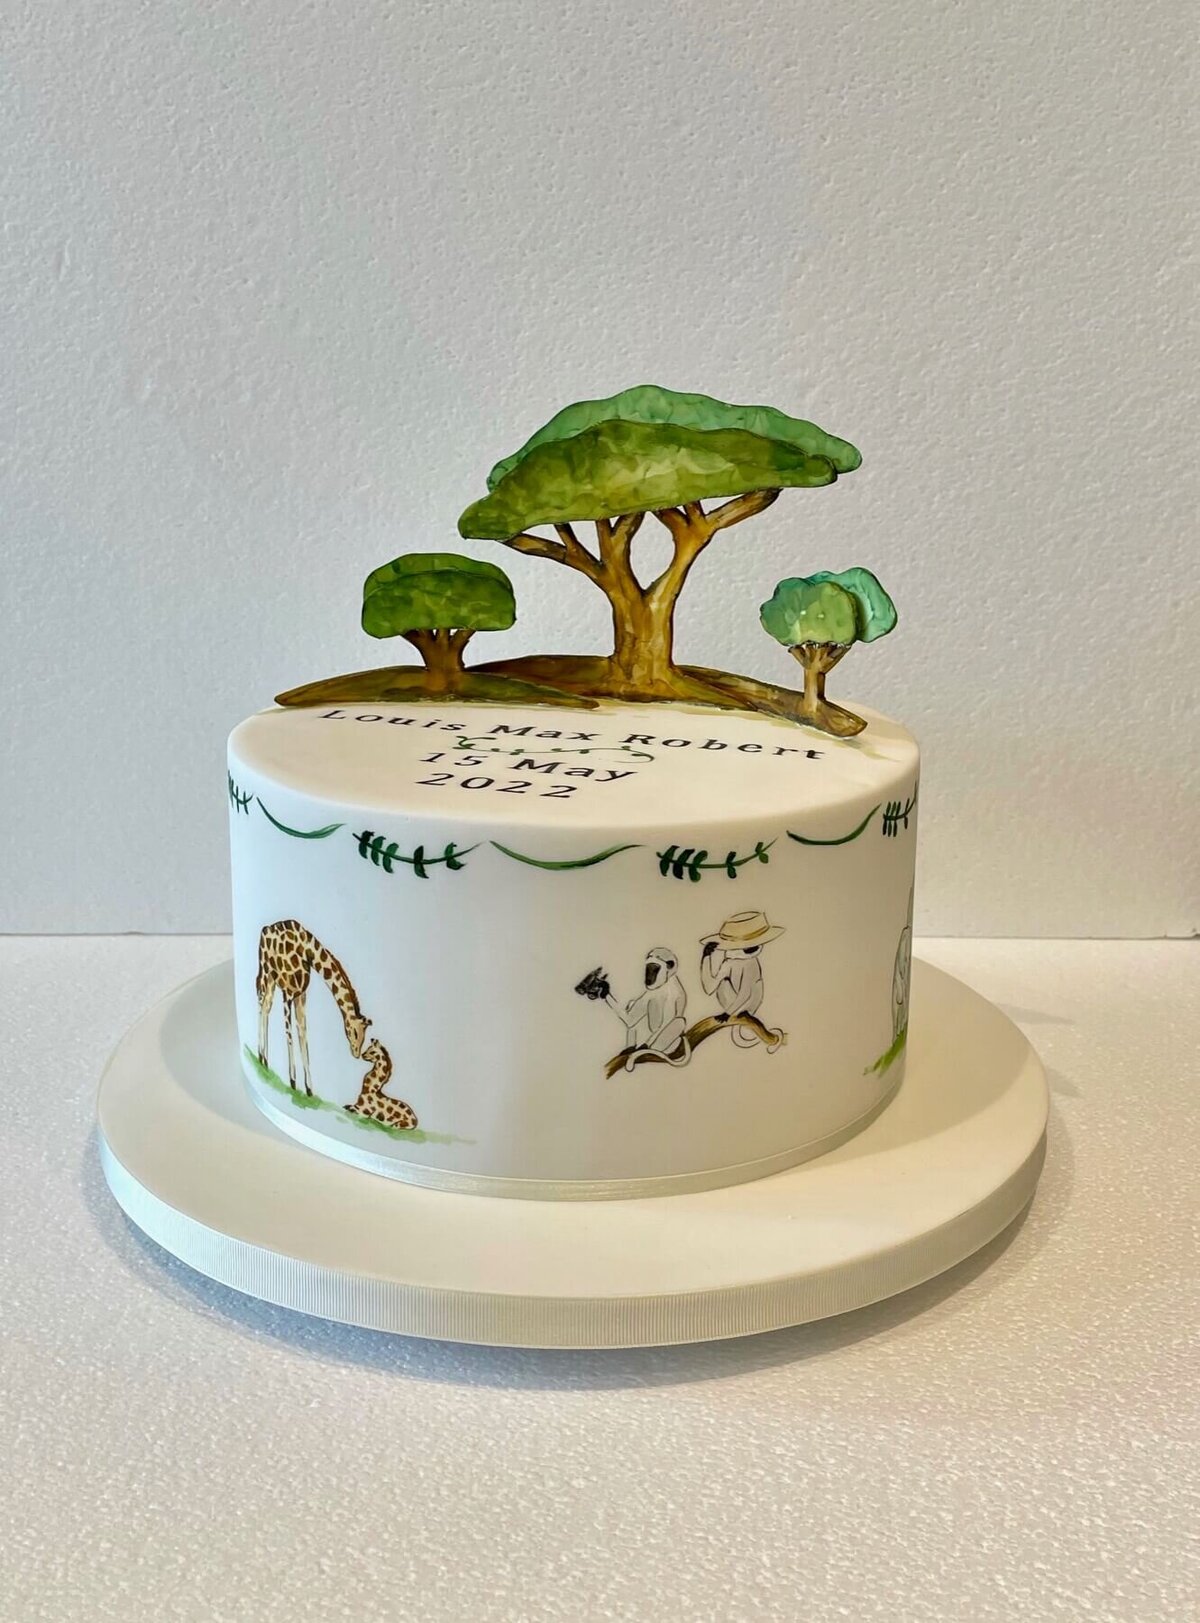 A hand painted cake with animals and a model of trees on top